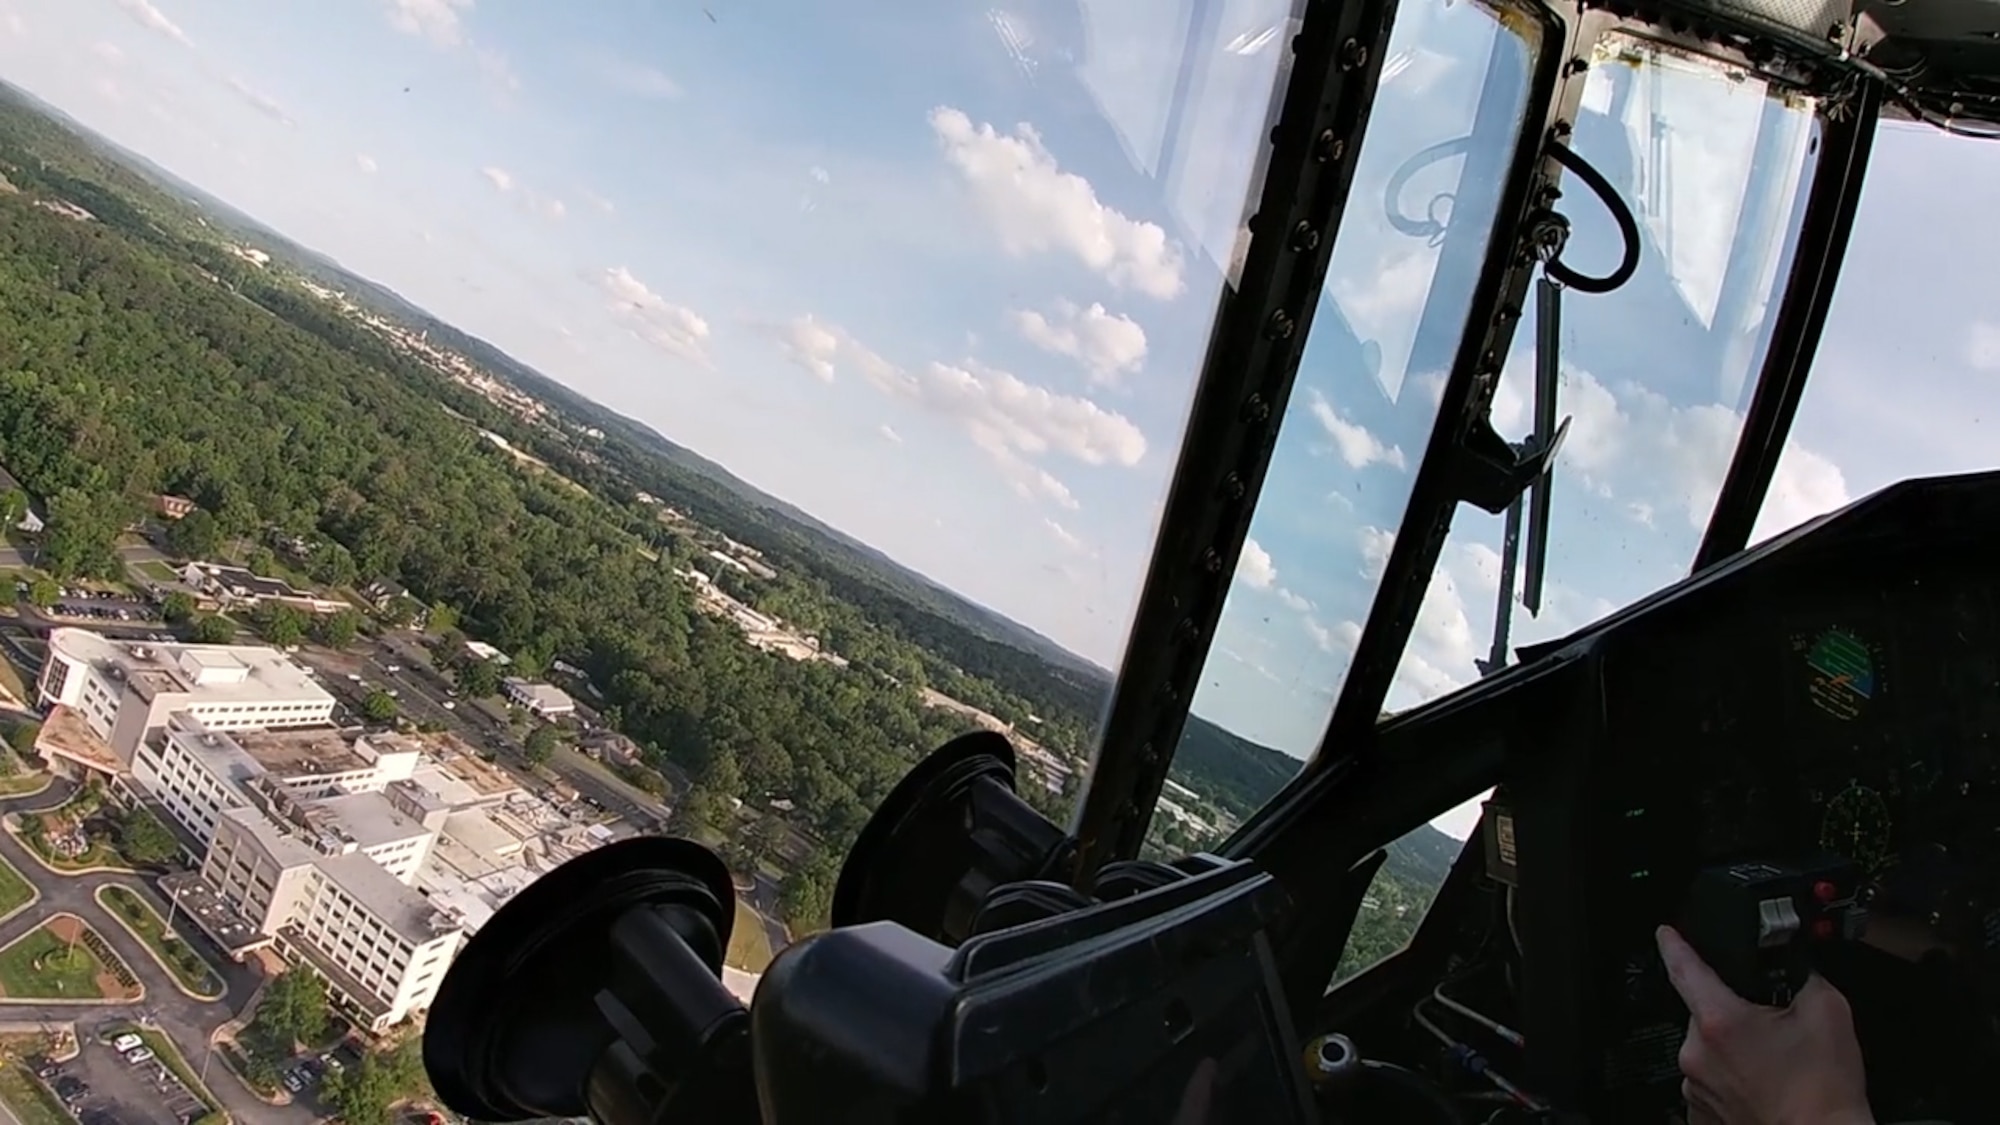 A C-130H3 Hercules from Dobbins flies over north Georgia en route to a number of hospitals in the region where it and another C-130 from Dobbins performed a flyover to show appreciation on May 14, 2020. The two C-130s took off from Dobbins around 6 p.m. that day and headed toward hospitals in Kennesaw, Canton, Japer, Dalton, Rome, Cartersville and Hiram. (U.S. Air Force photo/Master Sgt. Michael McGhee)